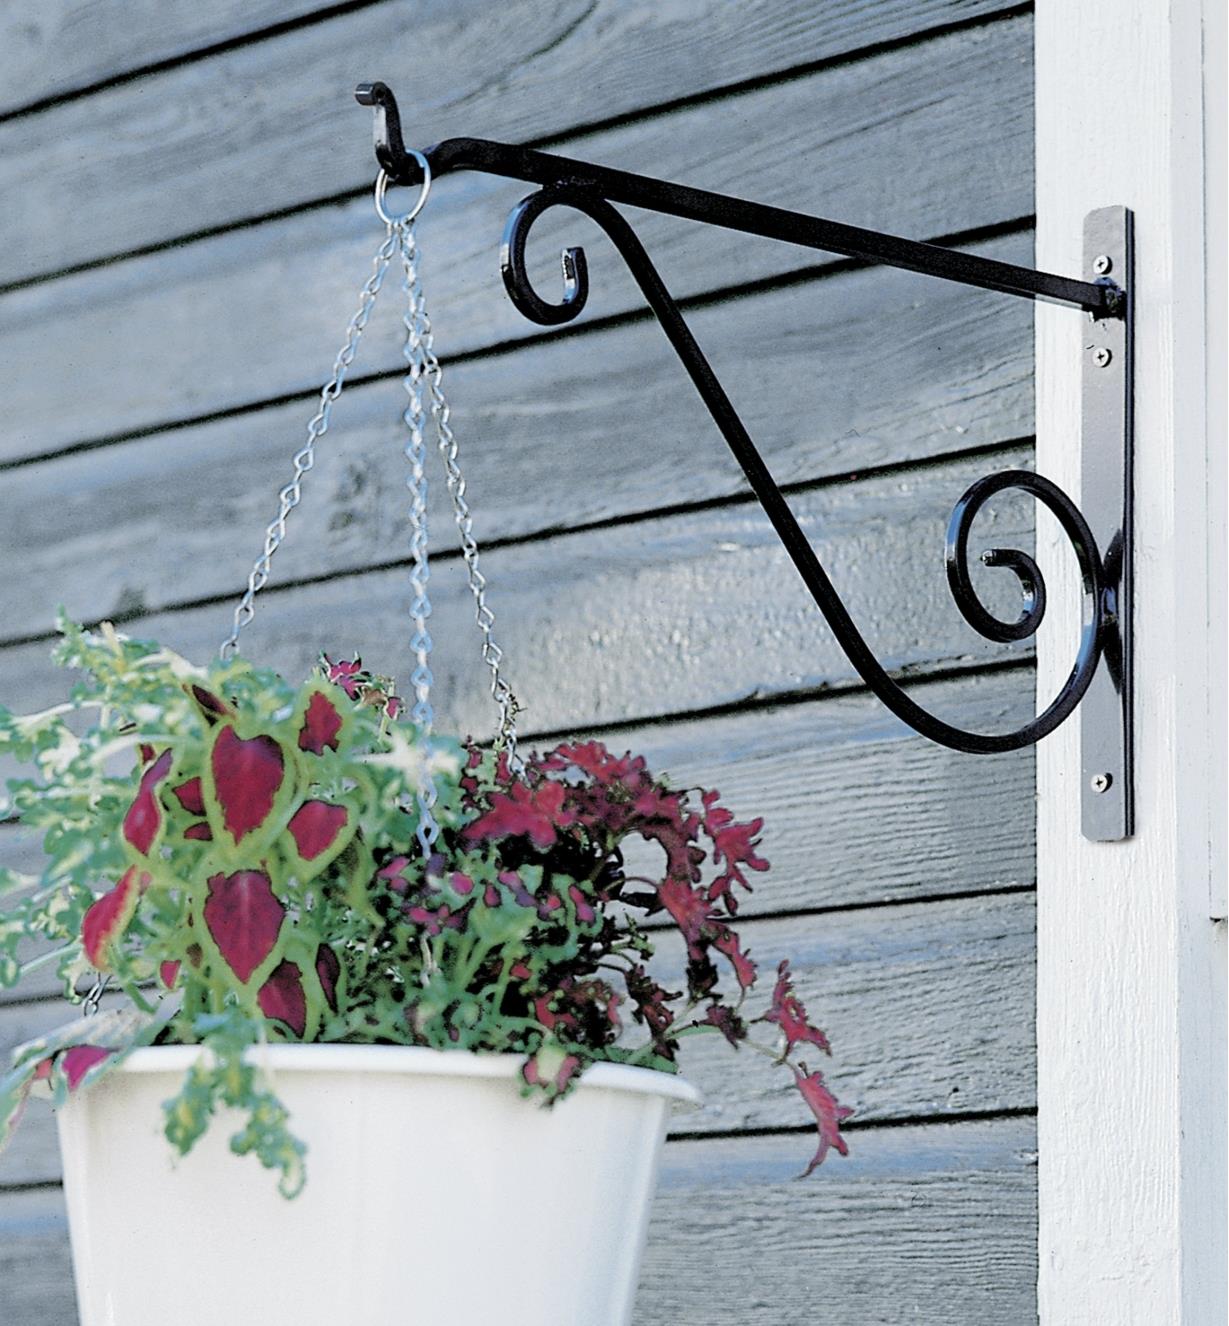 Wrought-Iron Wall Bracket holding a hanging basket on an outdoor post